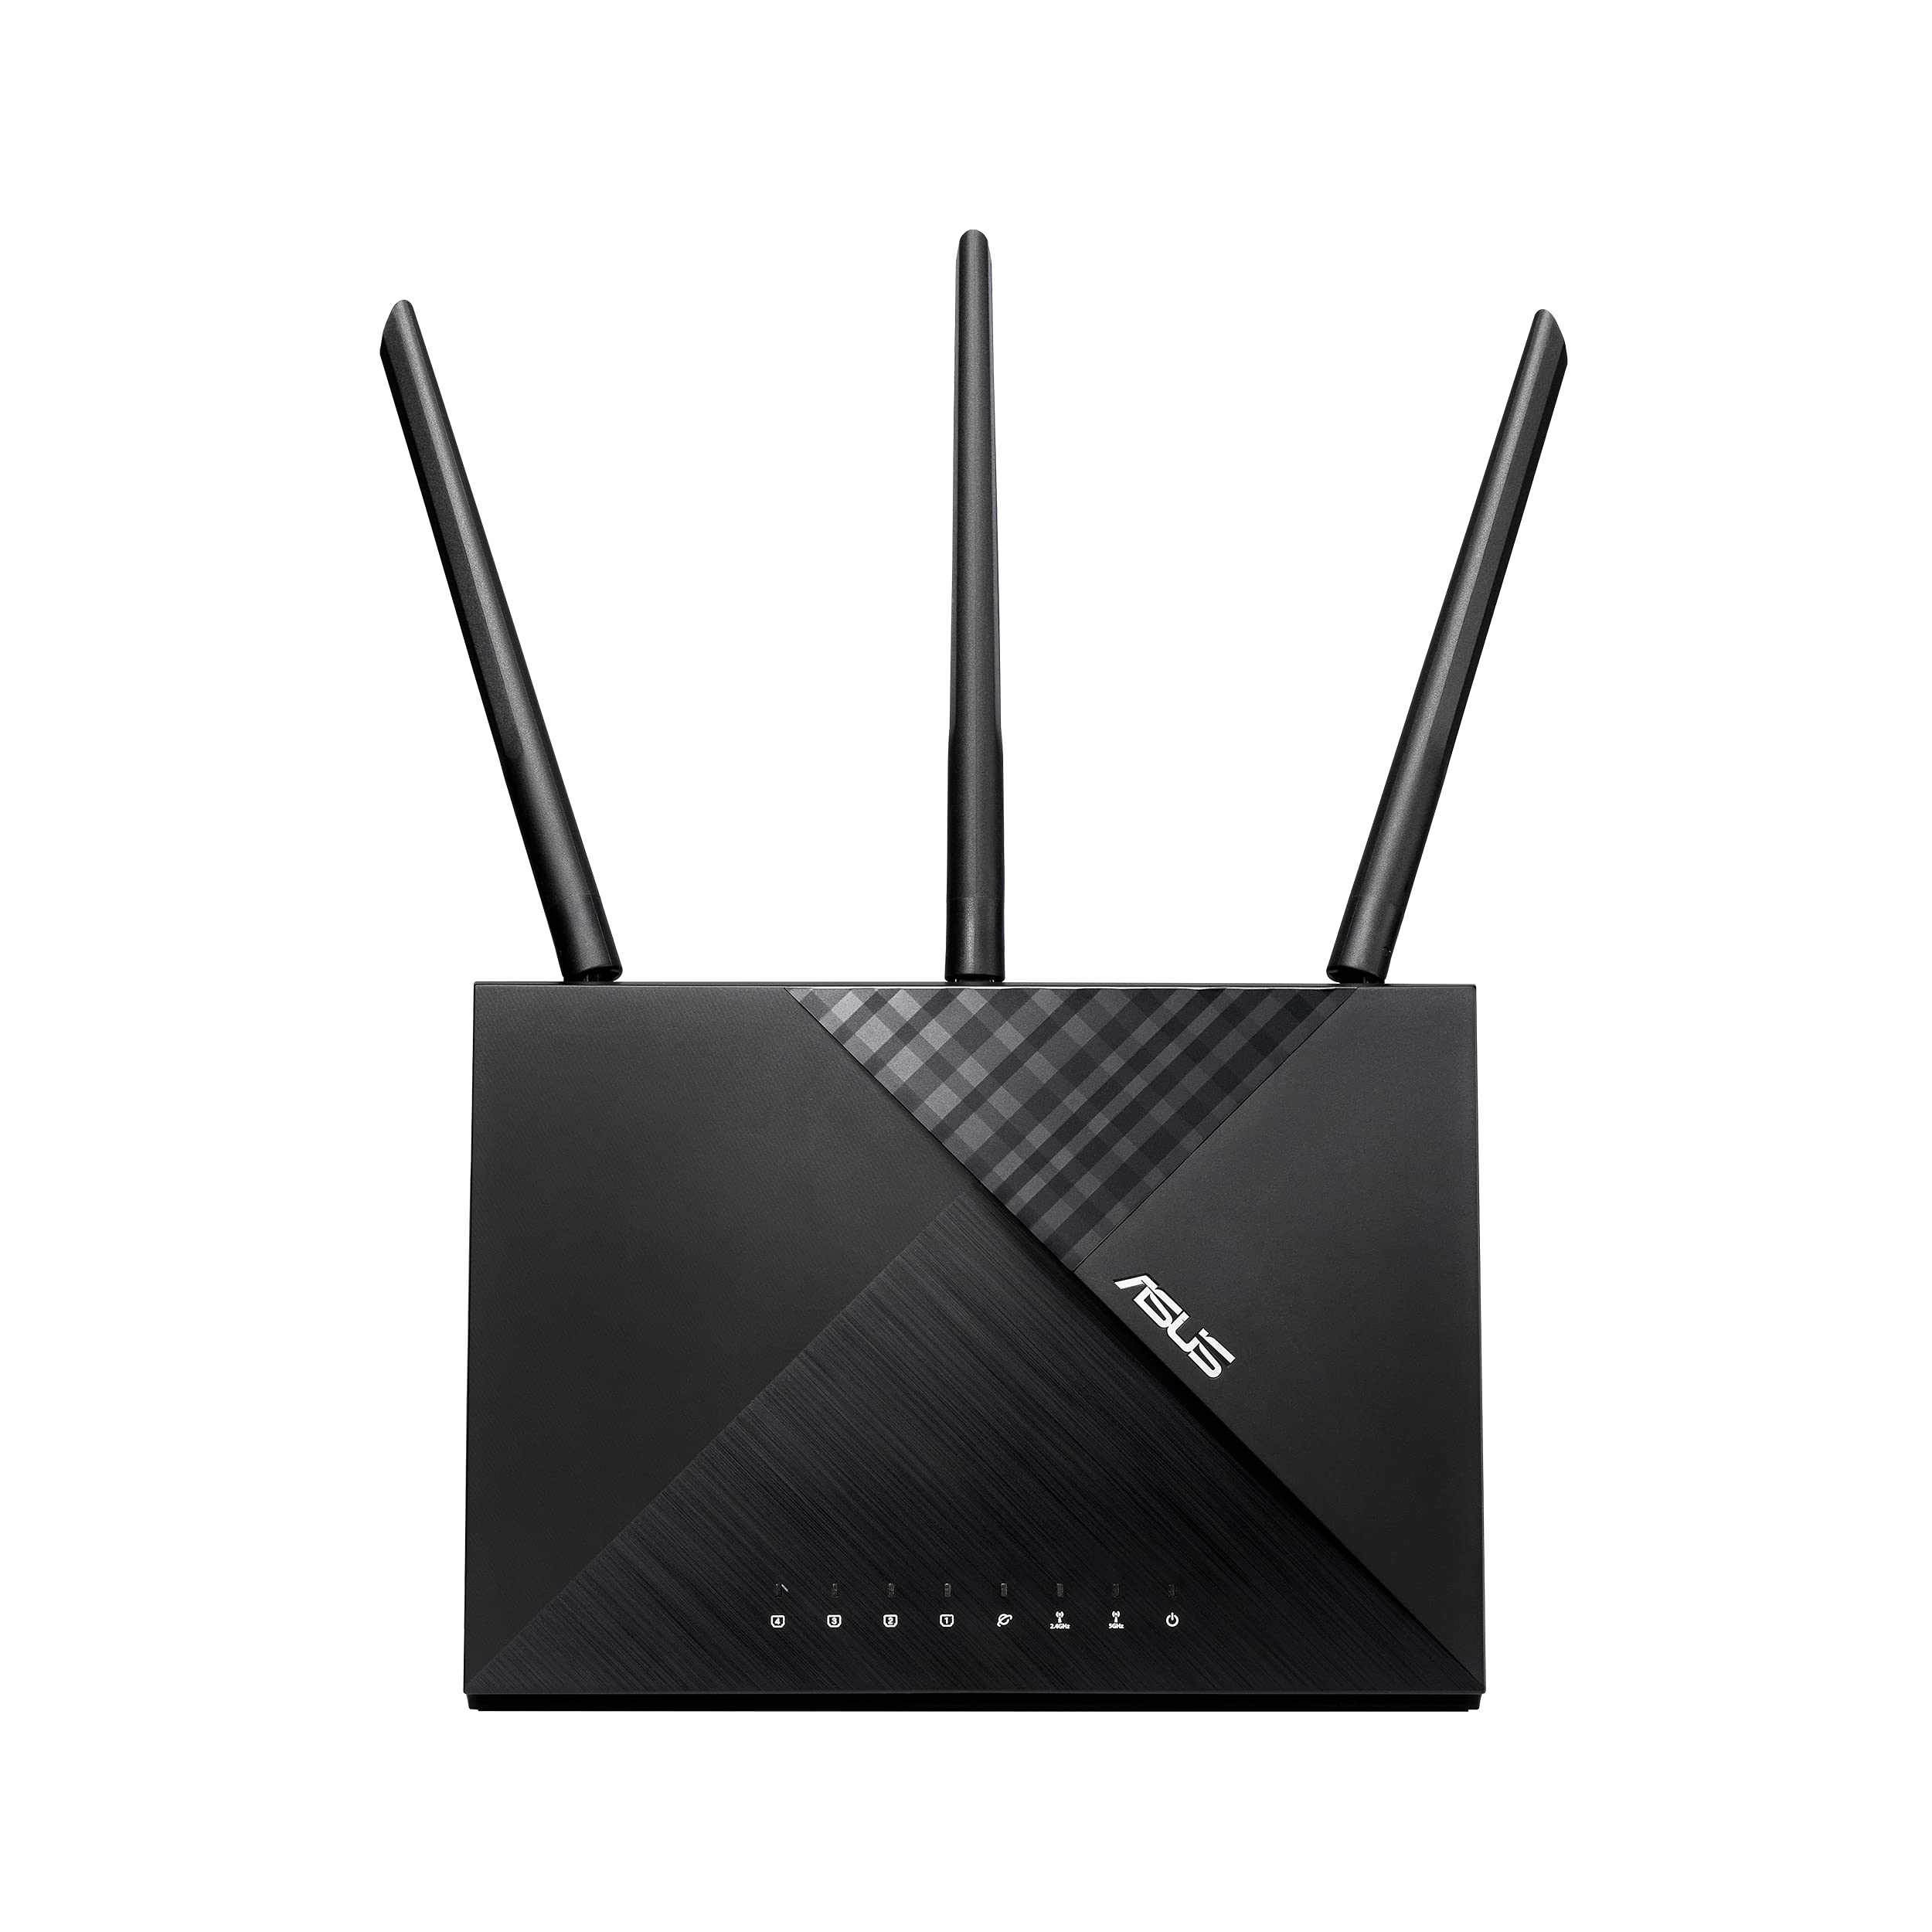 ASUS AC1750 WiFi Router (RT-ACRH18) - Dual Band Wireless Internet Router, Easy Setup, Parental Control, USB 3.0, AiRadar Beamforming Technology extends Speed, Stability & - $39.99